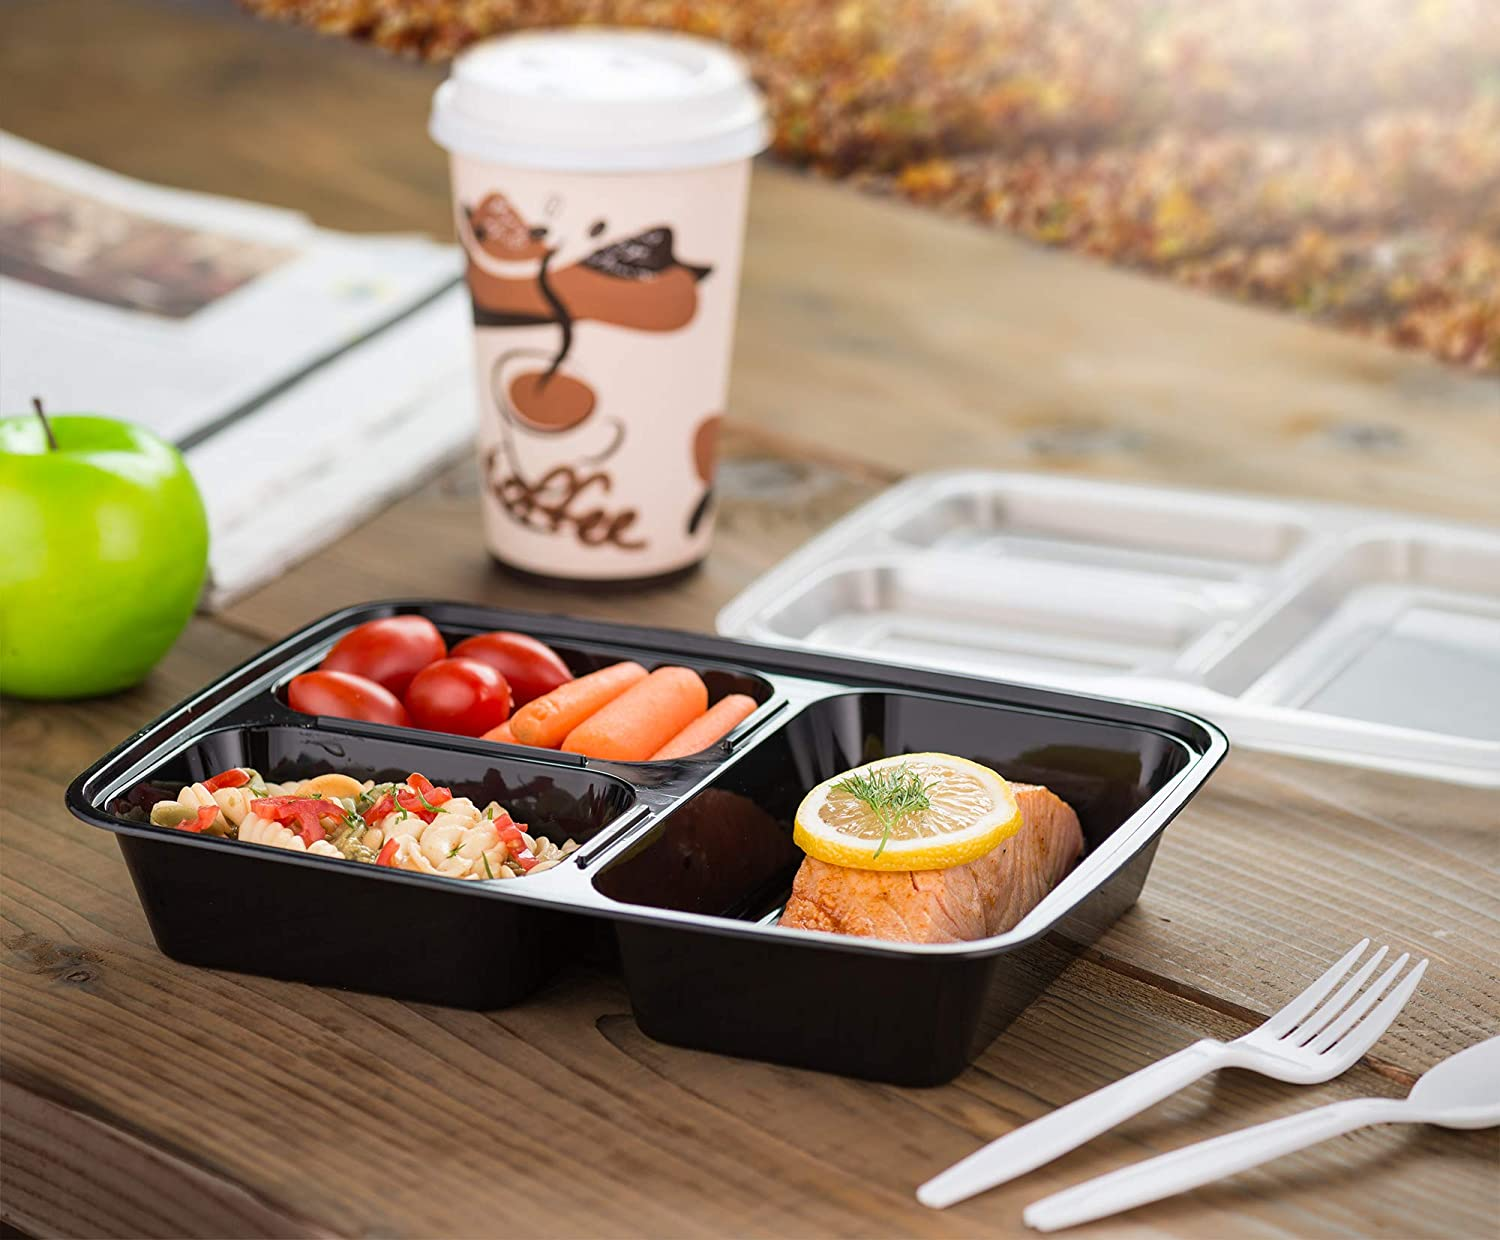 Should the Disposable Food Container be Injection mold or Thermoforming mold?